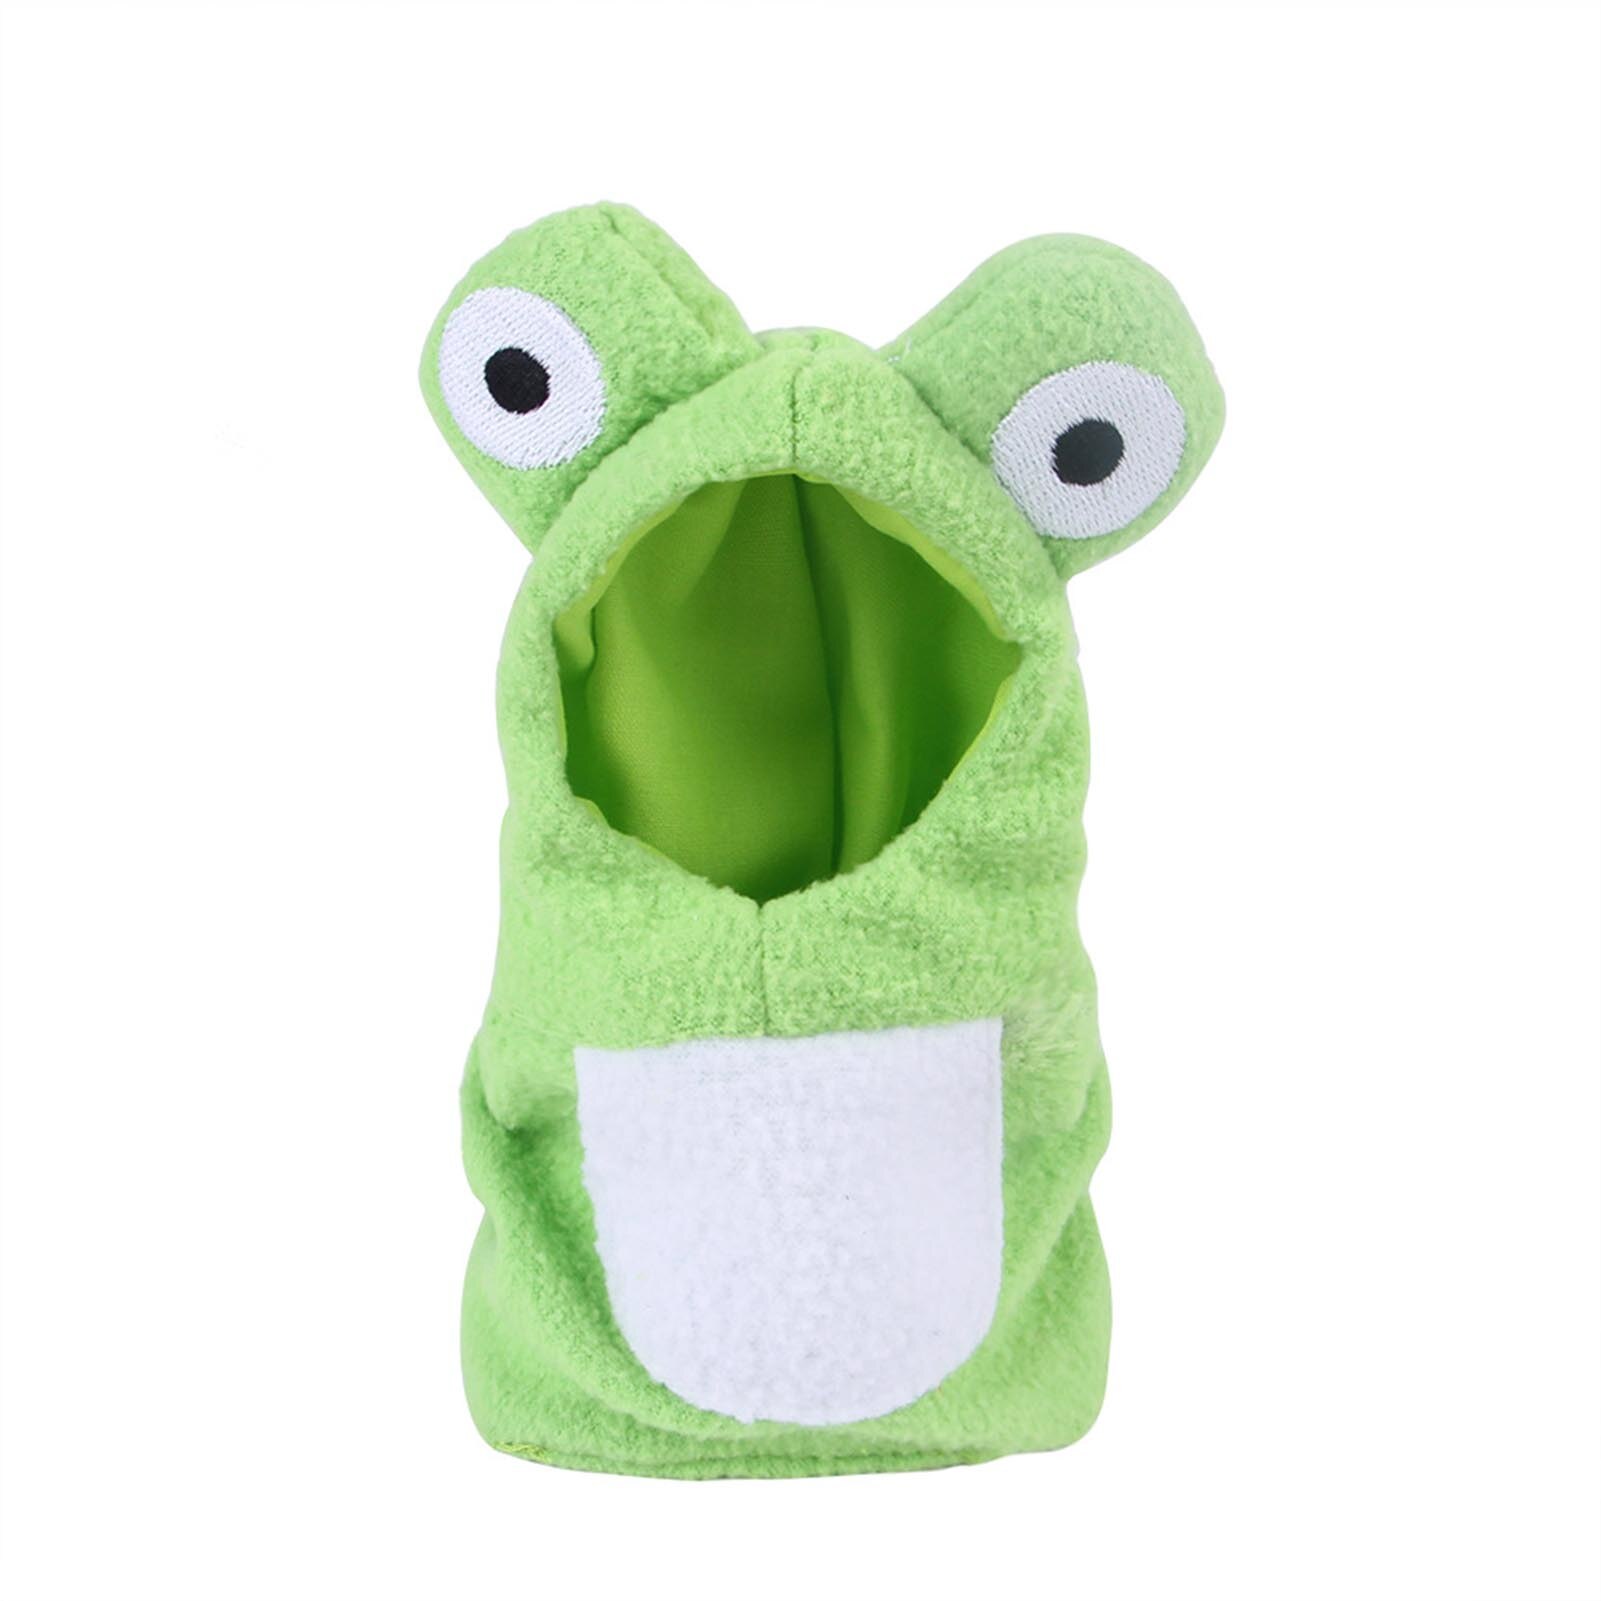 Bird's Hooded Winter Clothes Warm Hooded Coat Suit Frog Shape Cute Pet Parrot Outfit Winter Coat Warm Cozy Hooded Bird Clothes: M